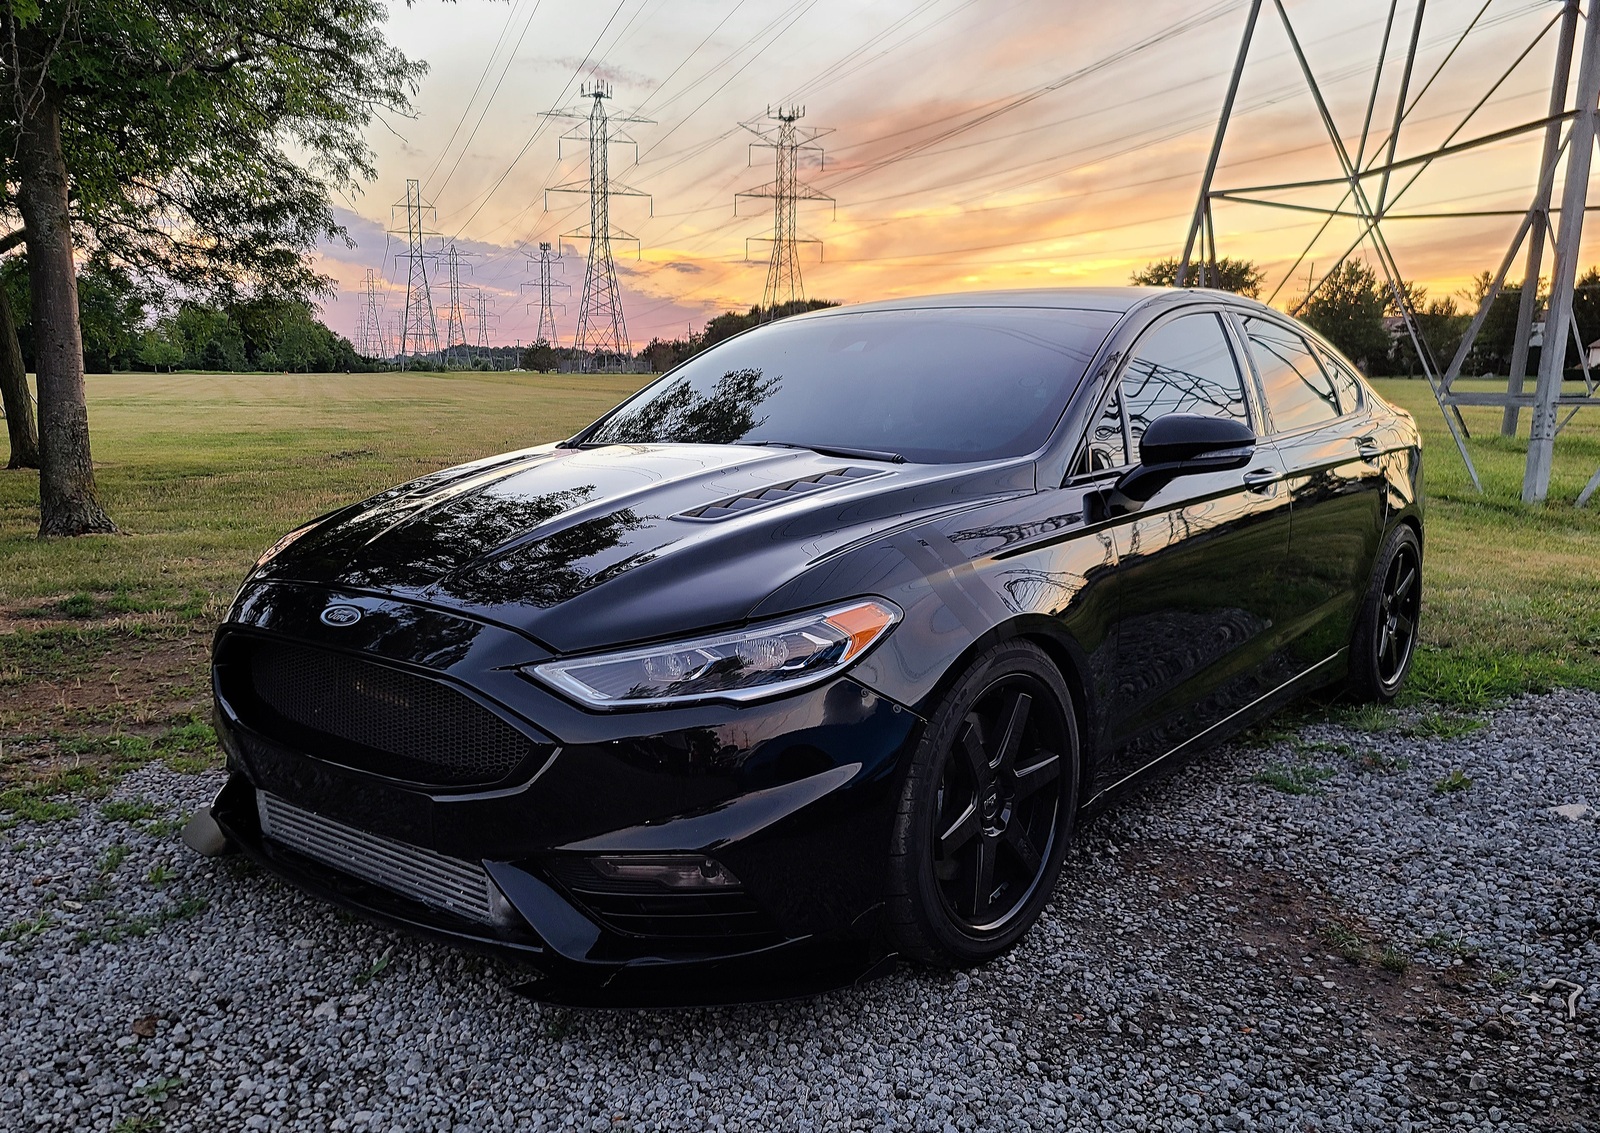 2018 Ford Fusion Sport 1/4 mile Drag Racing timeslip specs 0-60